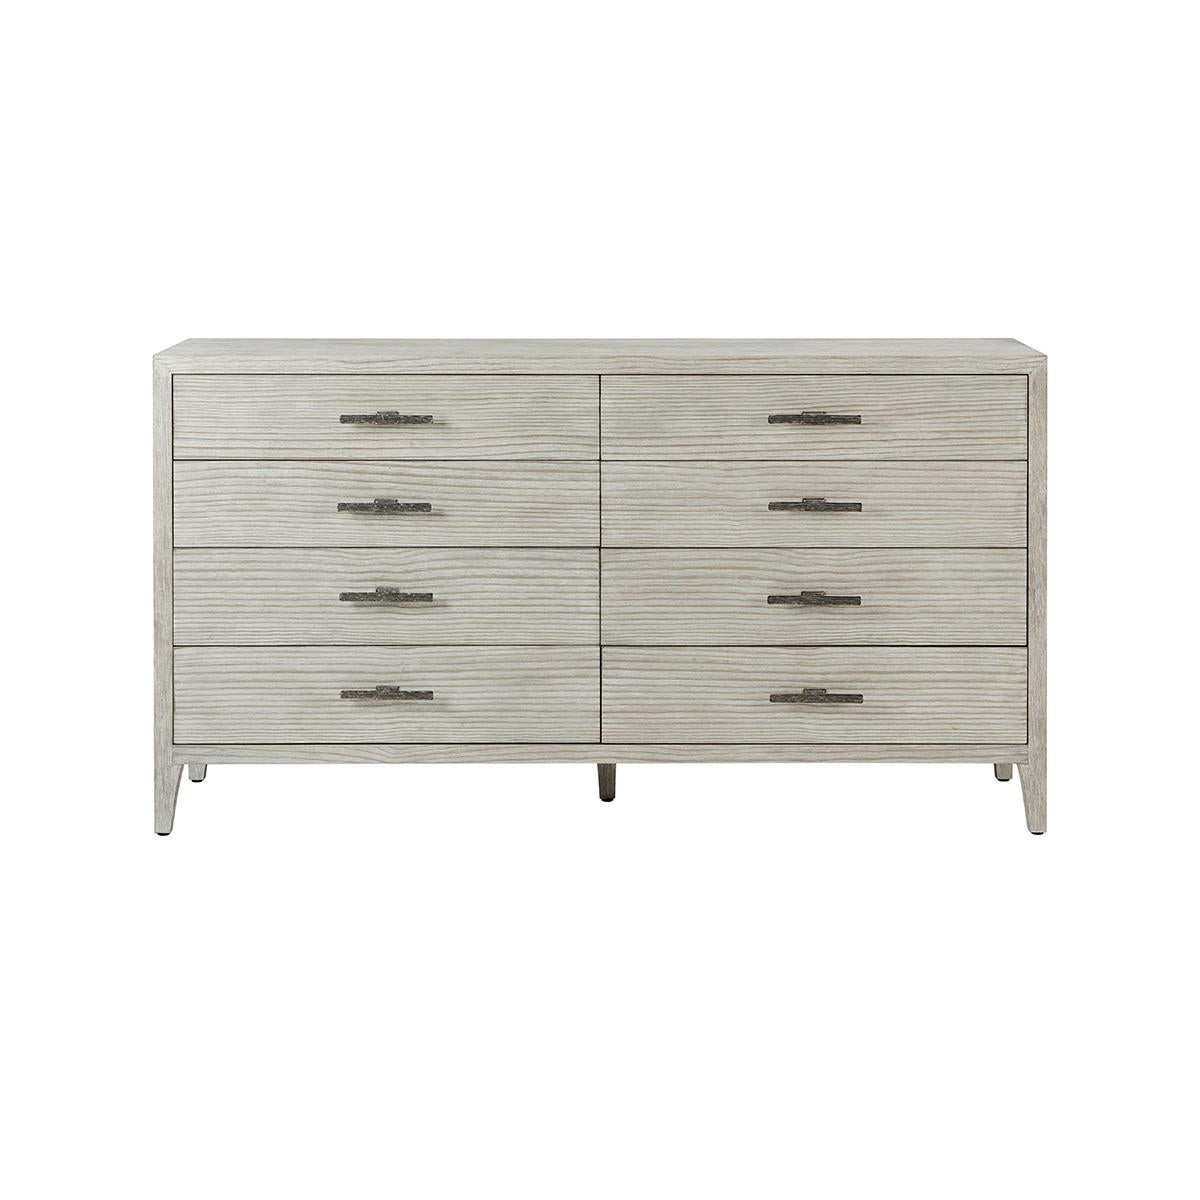 Designed to offer even more bedroom storage, the dresser is crafted from quartered pine in our sea salt finish and accented by uniquely cast ribbed bar hardware in a dark sterling finish. With eight soft close drawers atop tapered feet.

Dimensions: